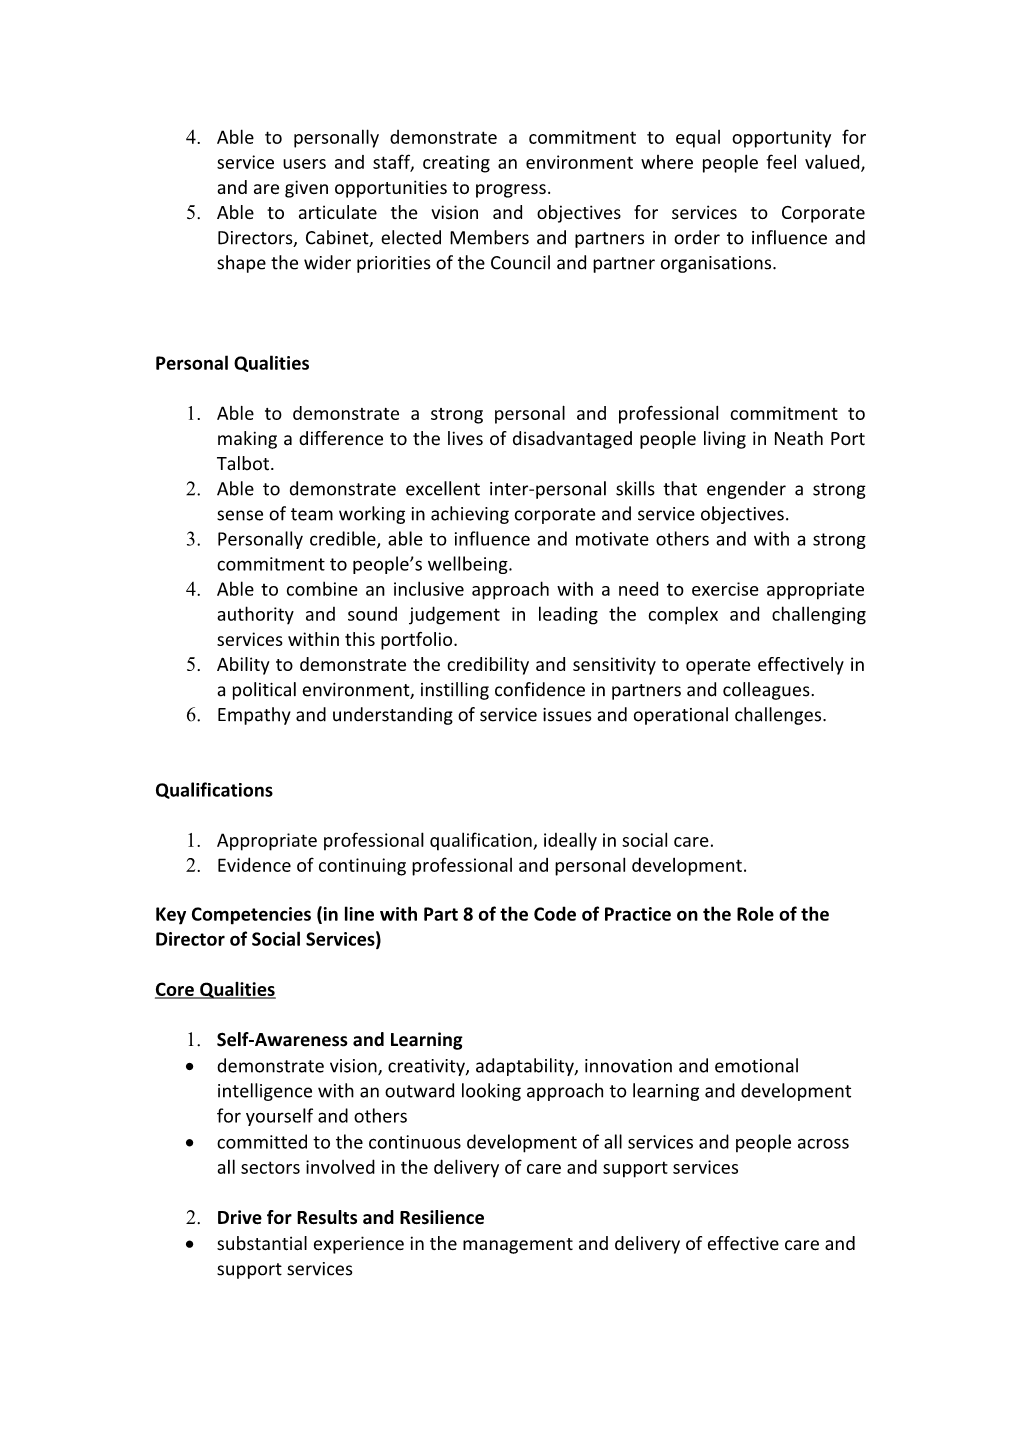 Person Specification - Director of Social Services, Health and Housing